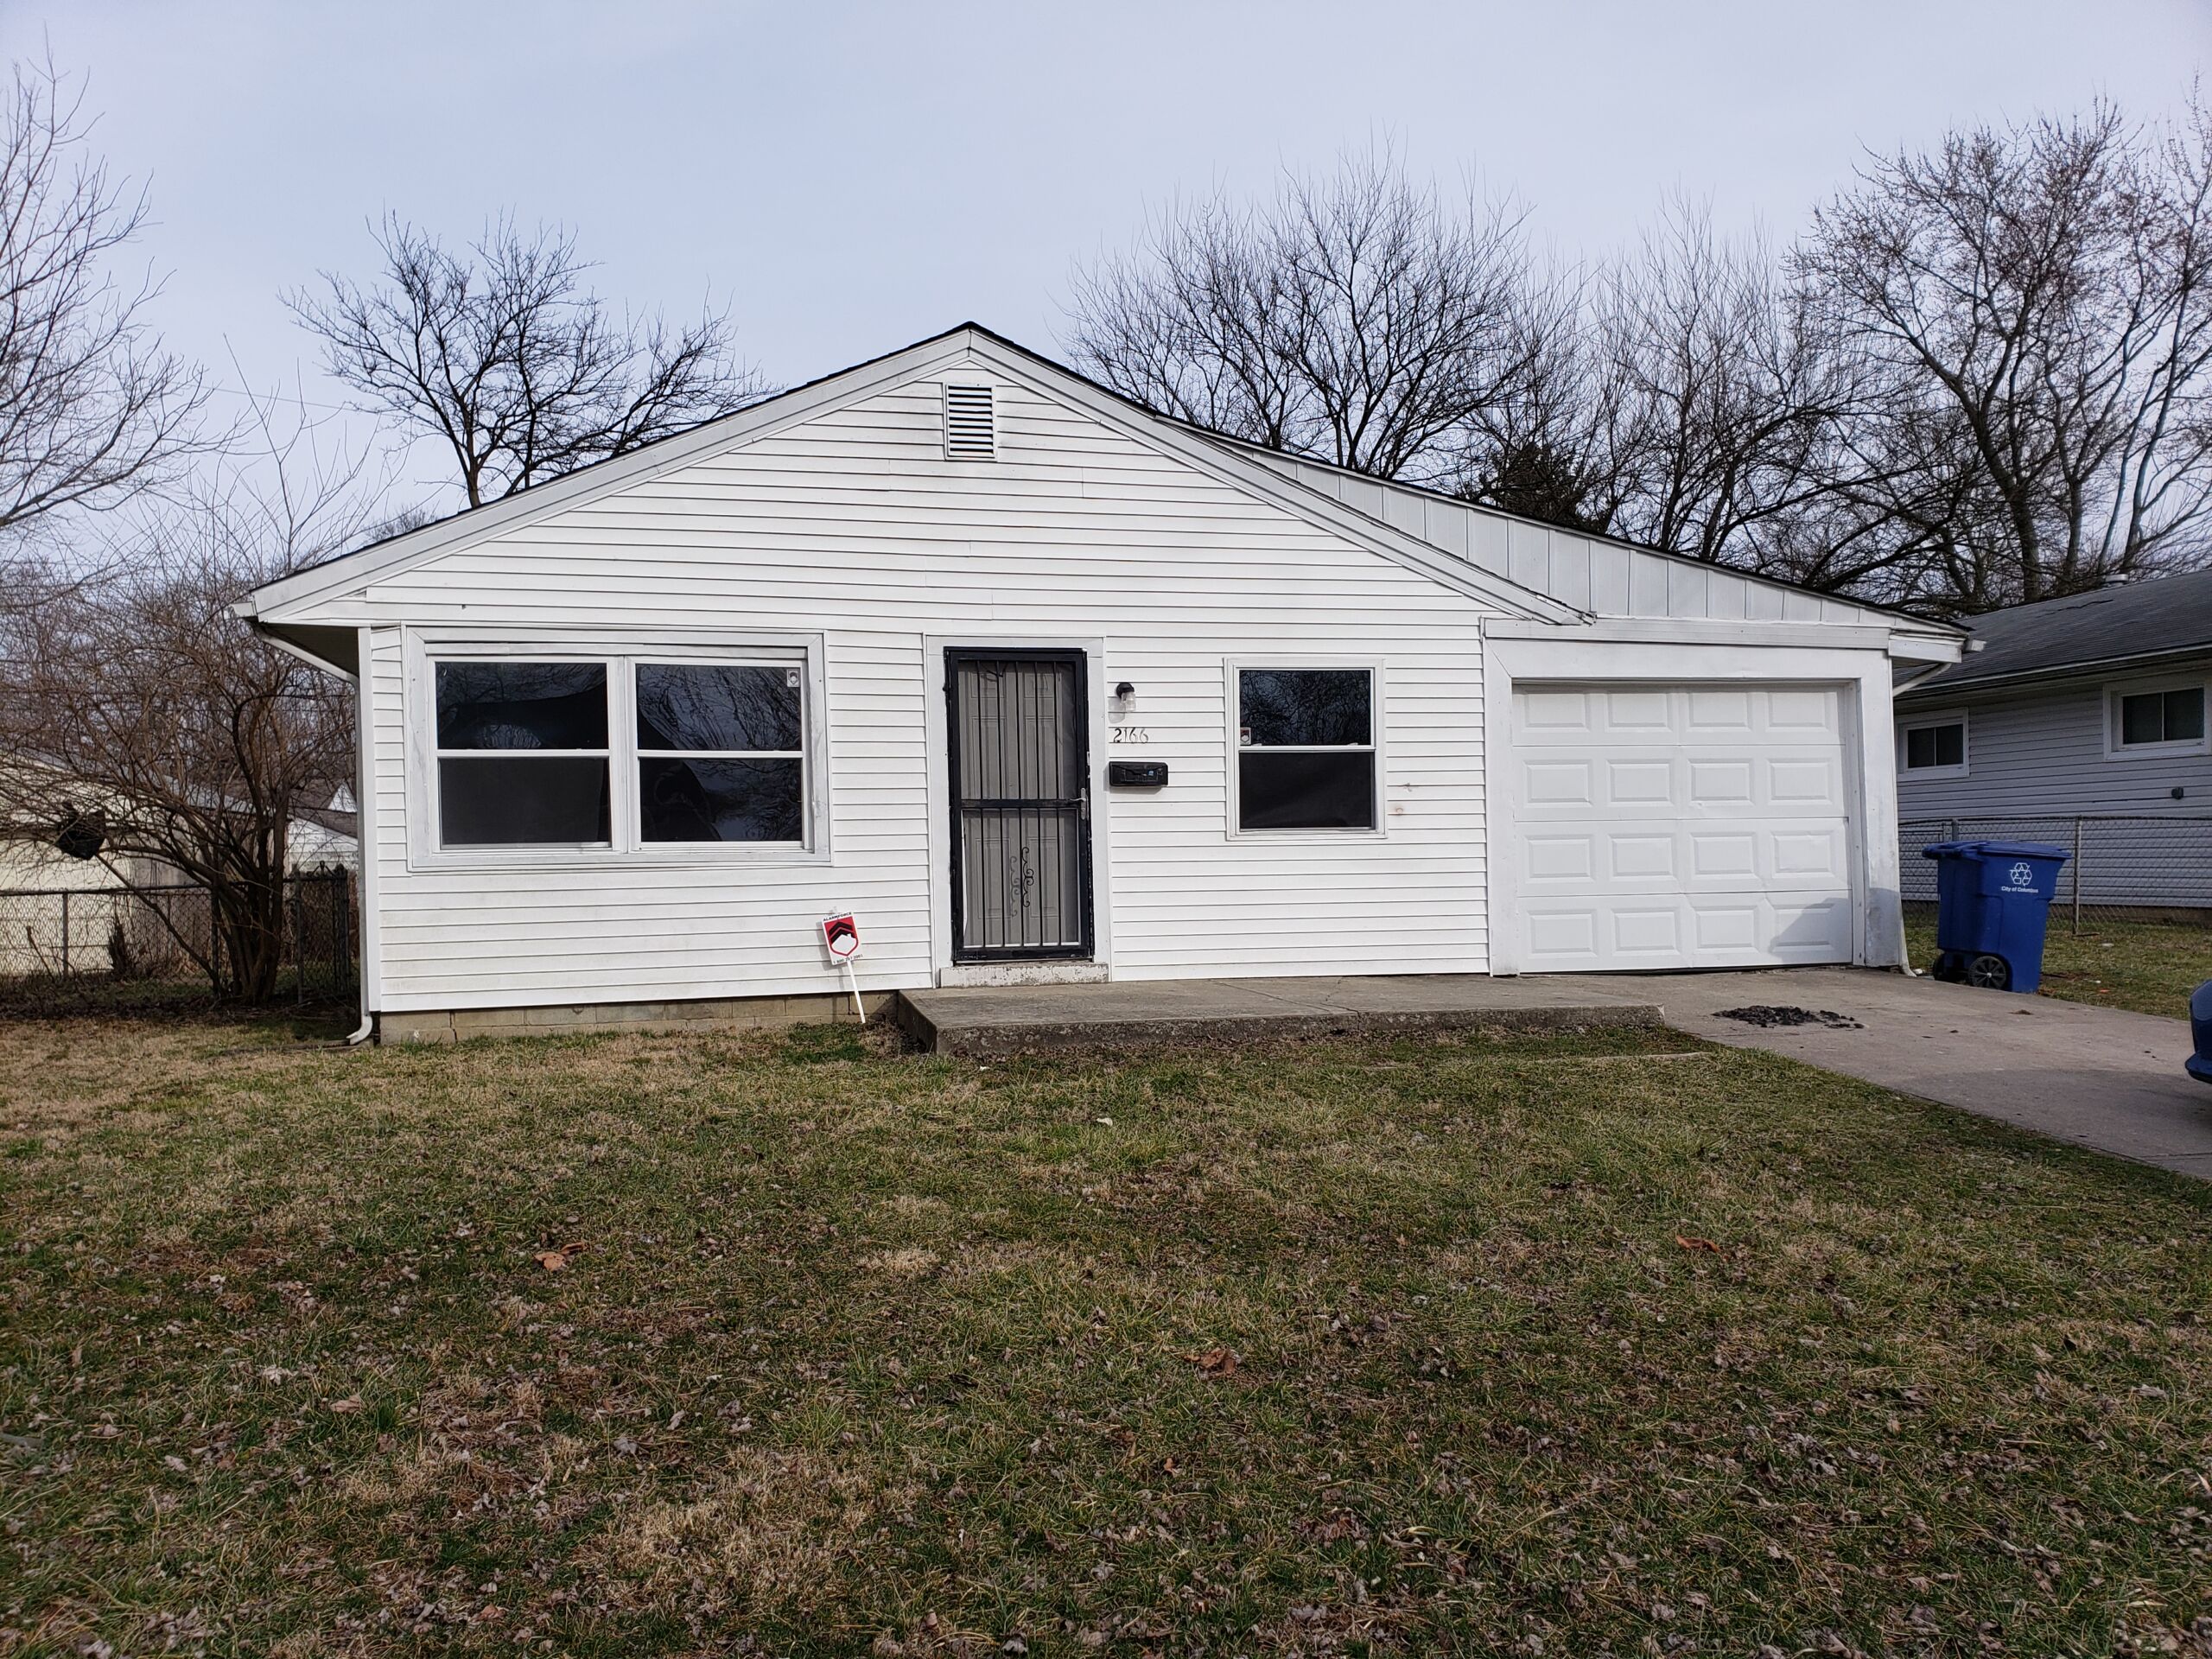 3 BR ranch in Central Columbus